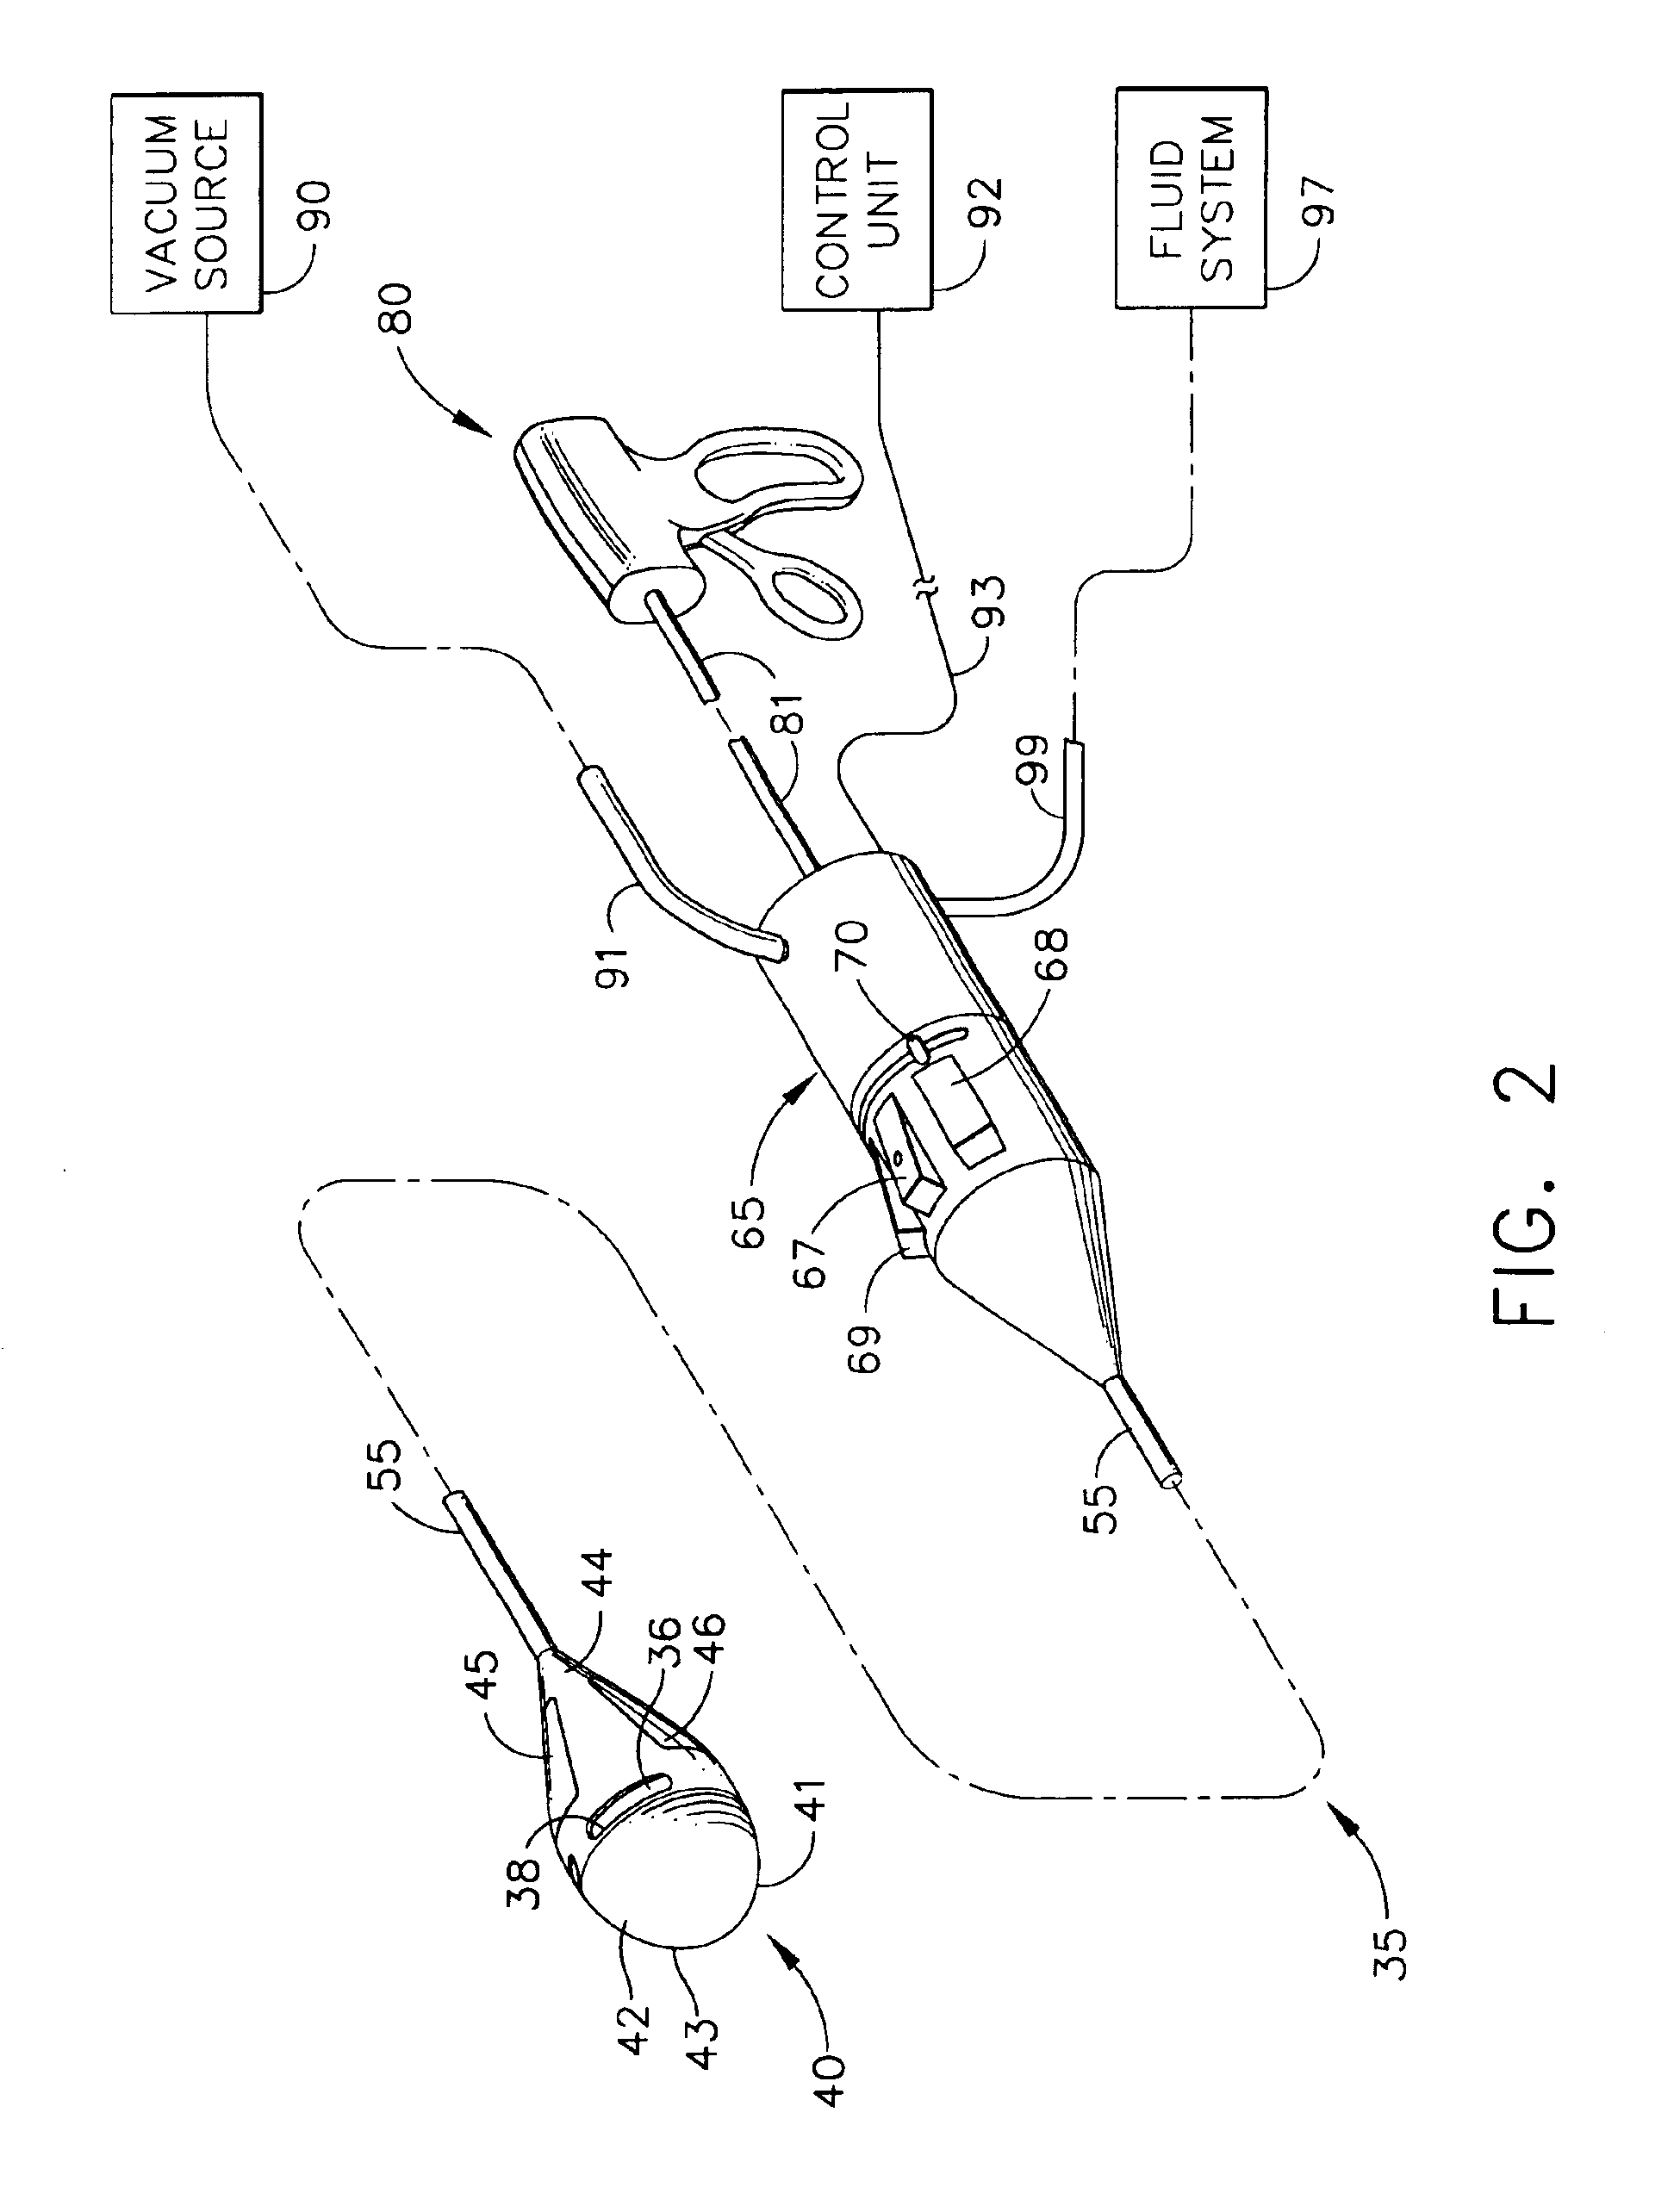 Self-propelled, intraluminal device with working channel and method of use